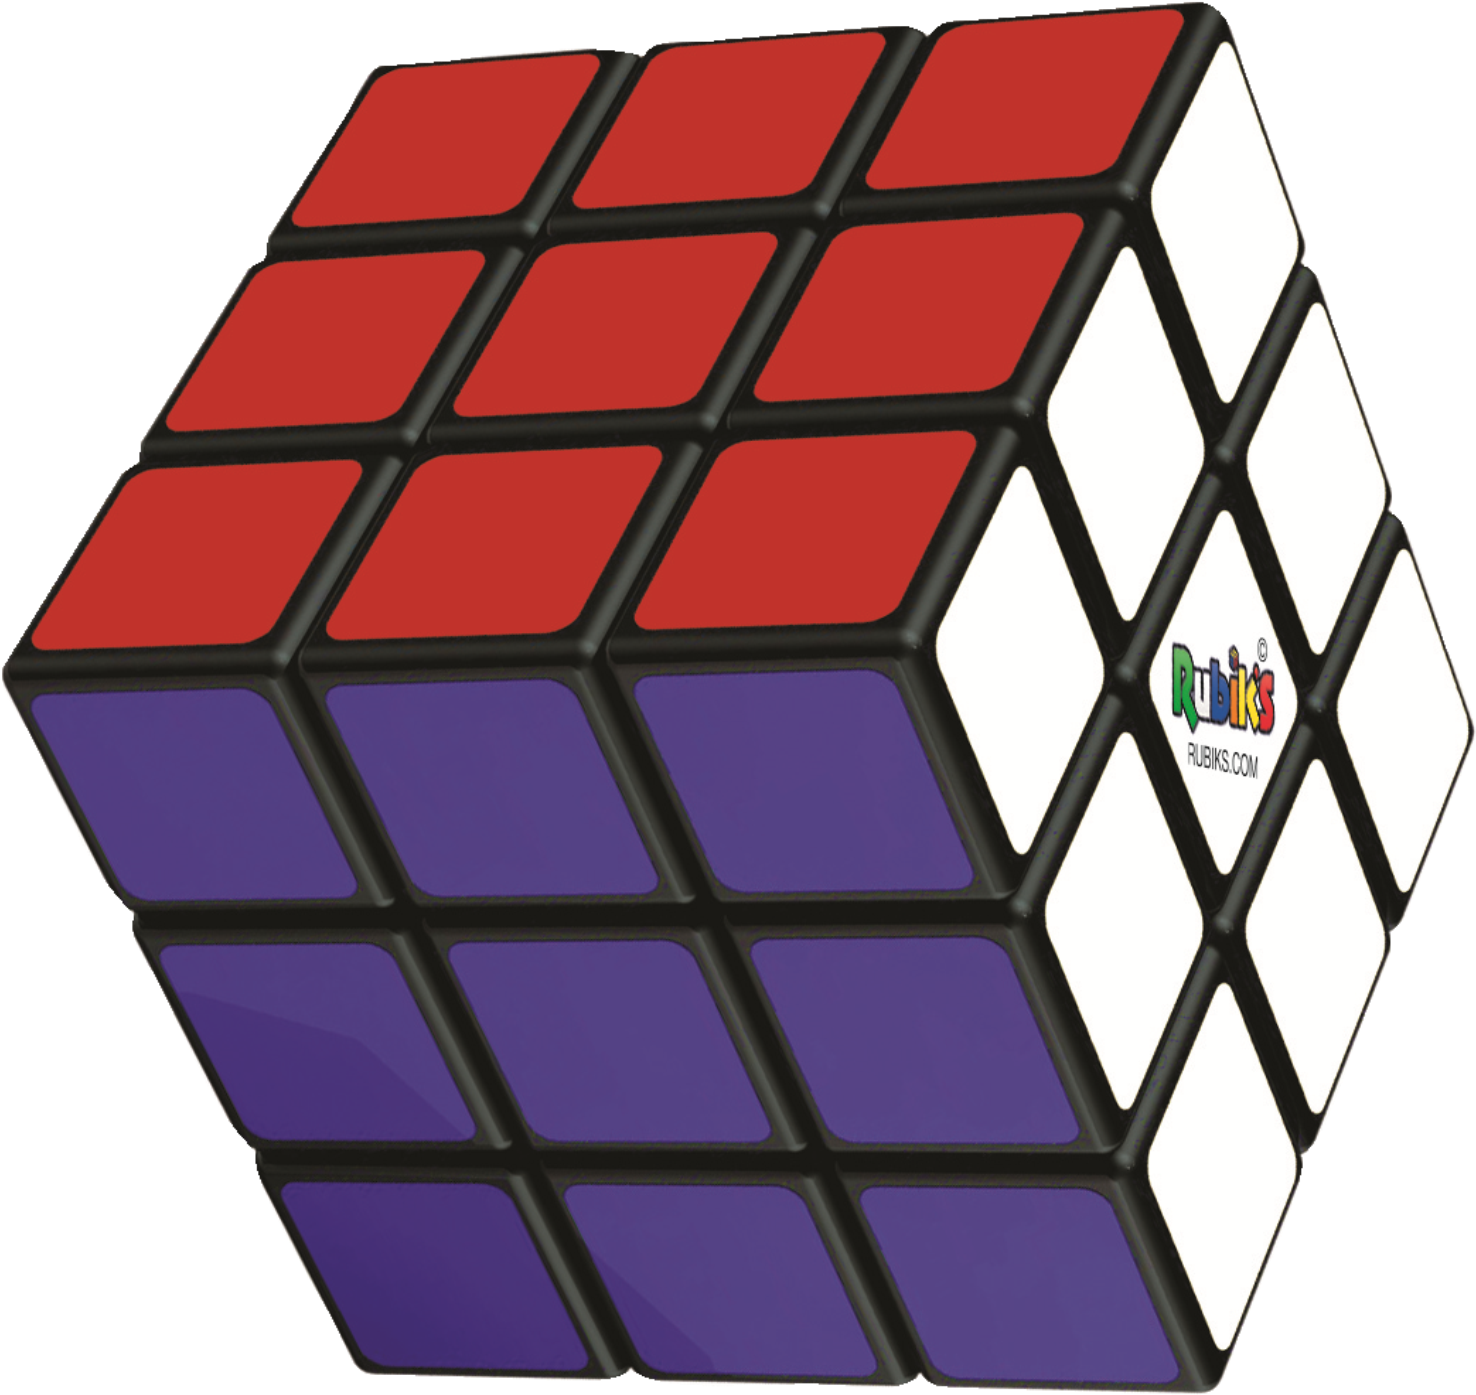 Rubiks Cube Partially Solved PNG image